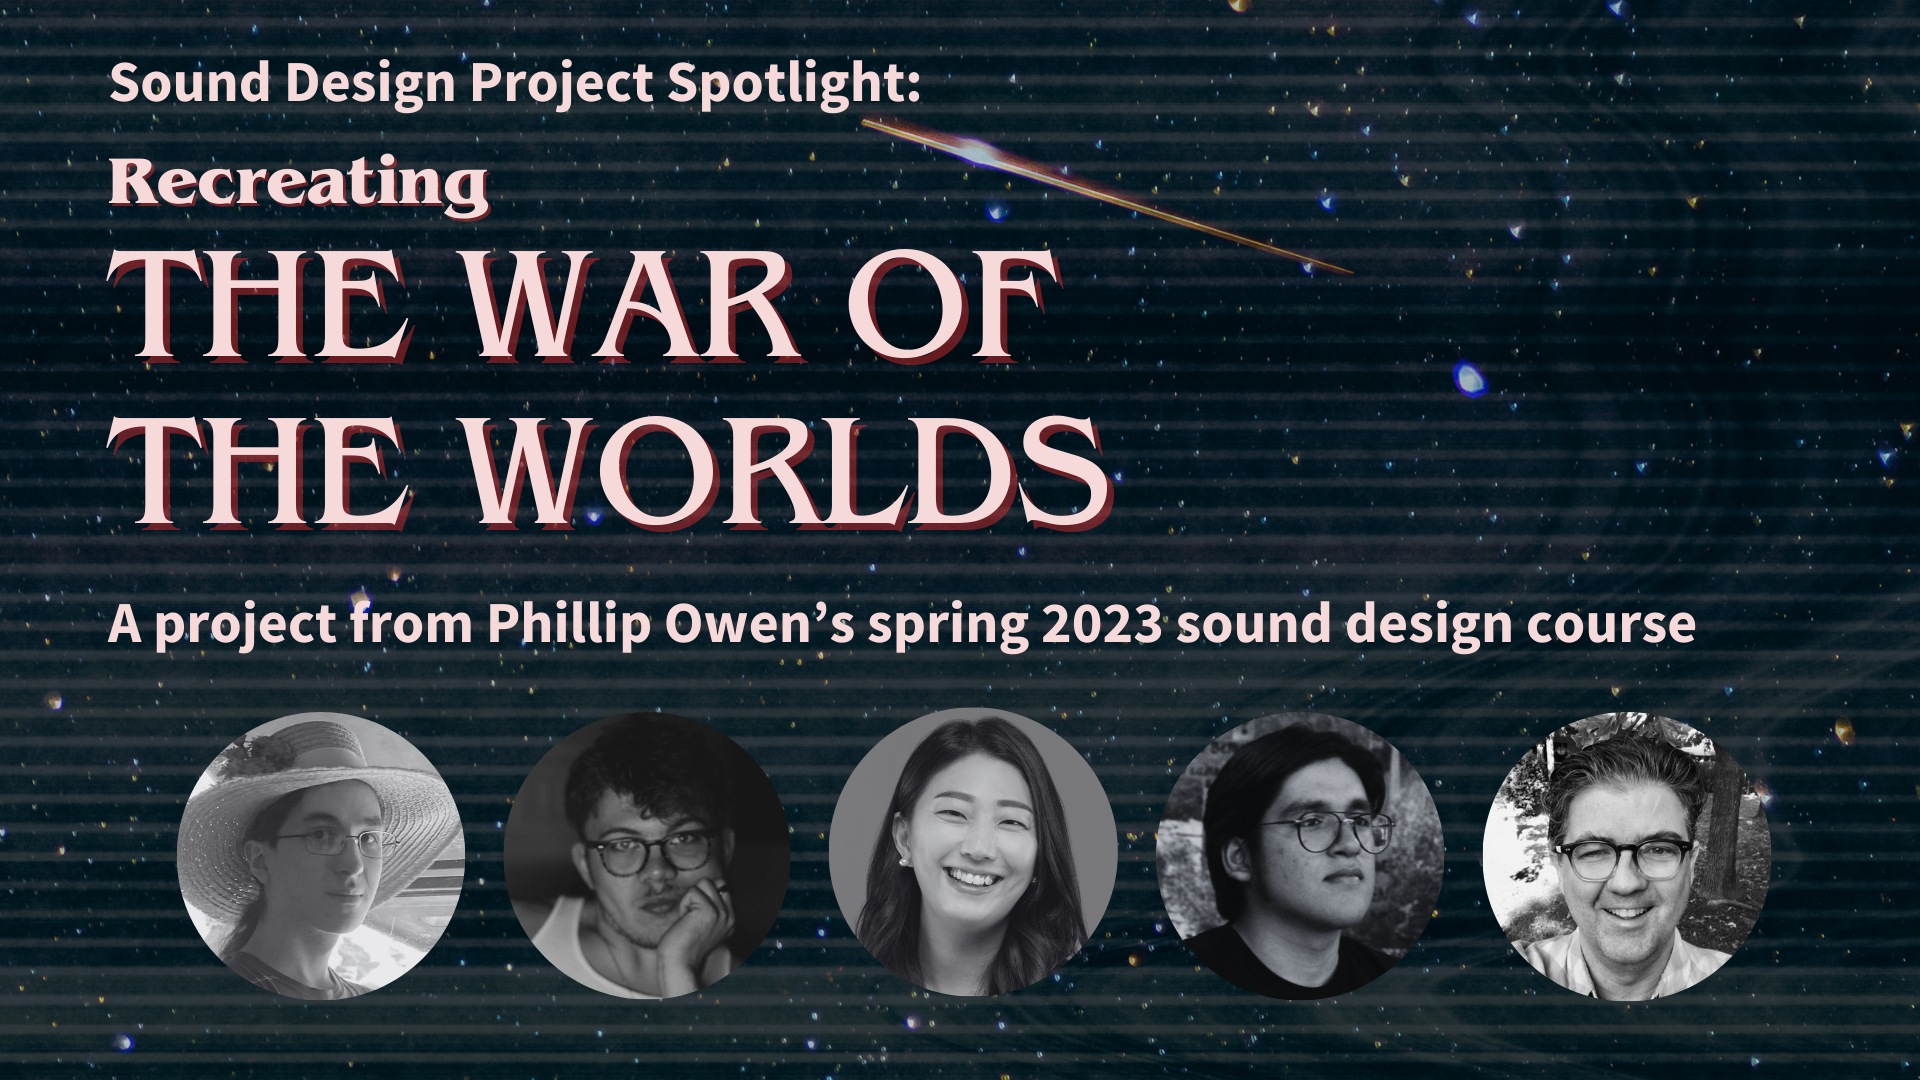 A graphic for the recreation of THE WAR OF THE WORLDS by Phillip Owen's sound design course, featuring headshots for Owen and four students